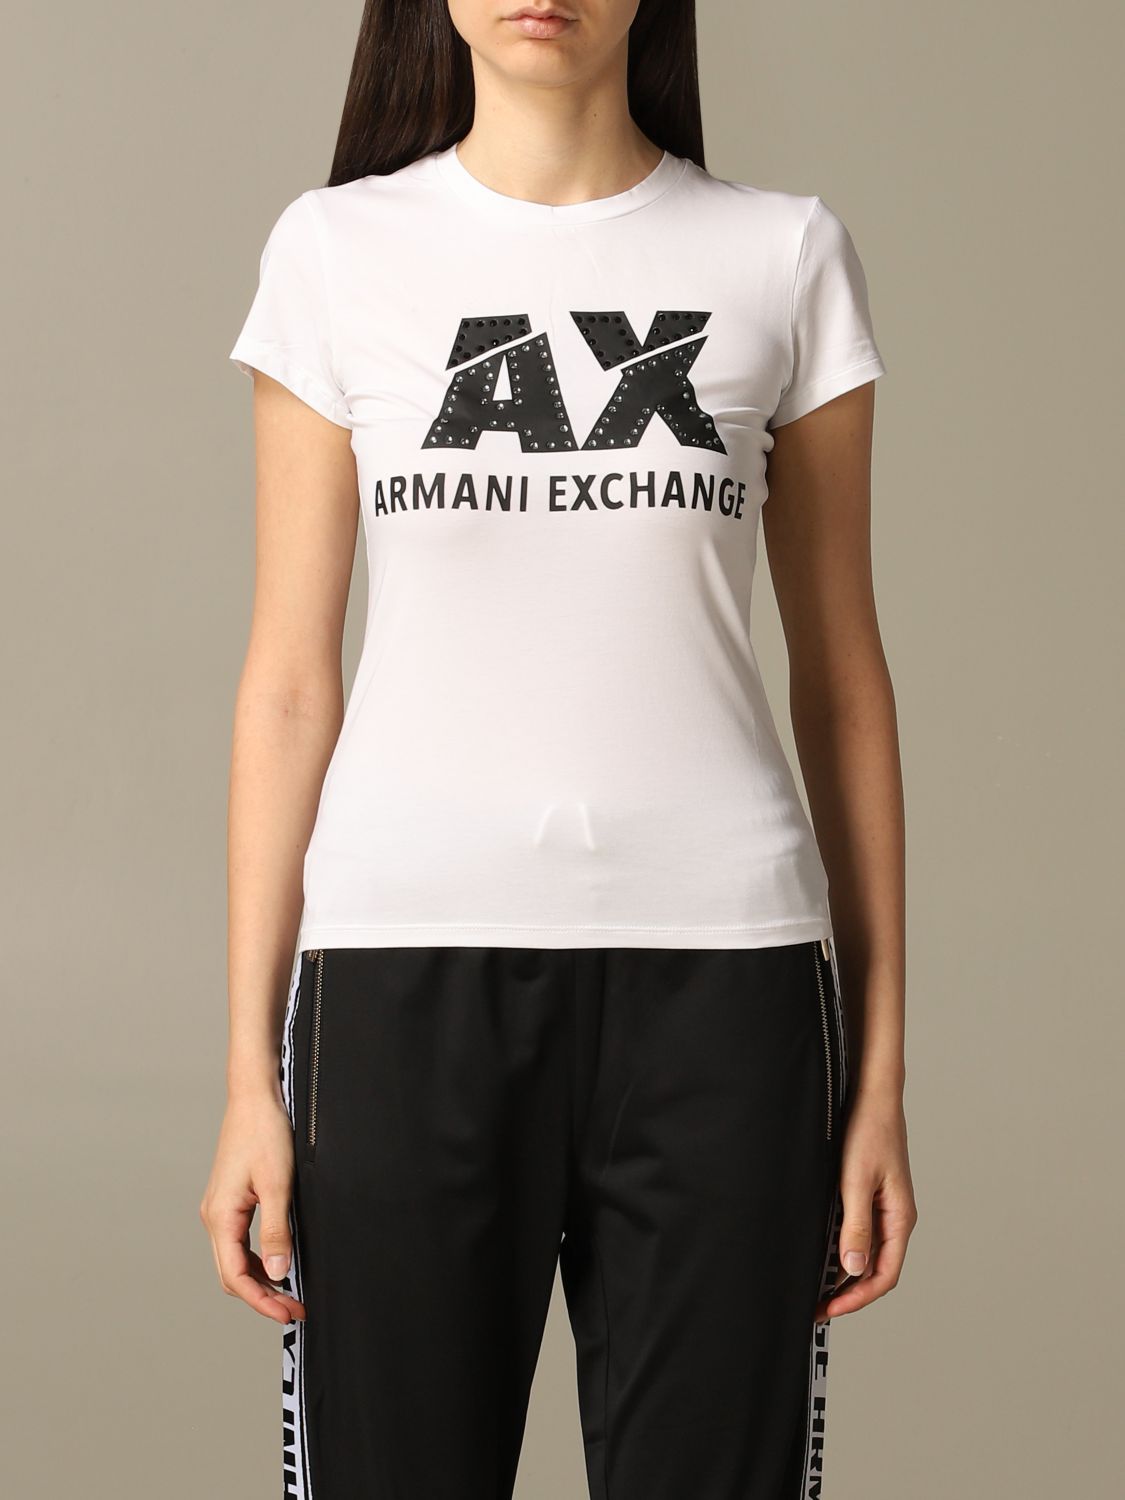 armani exchange for womens